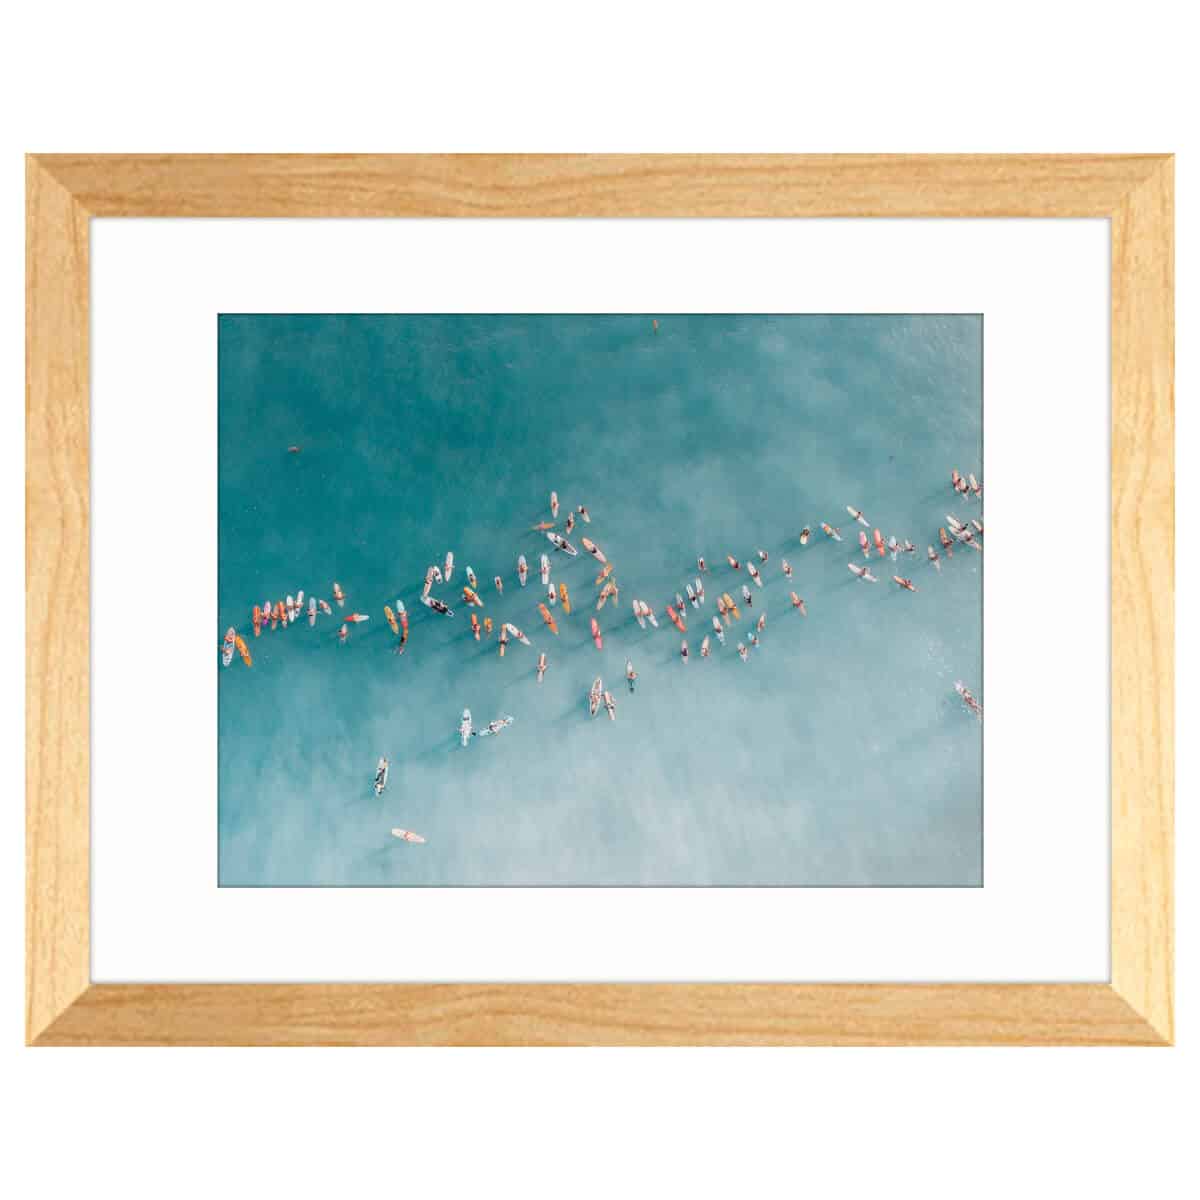 paddle out bree poort matted wood frame